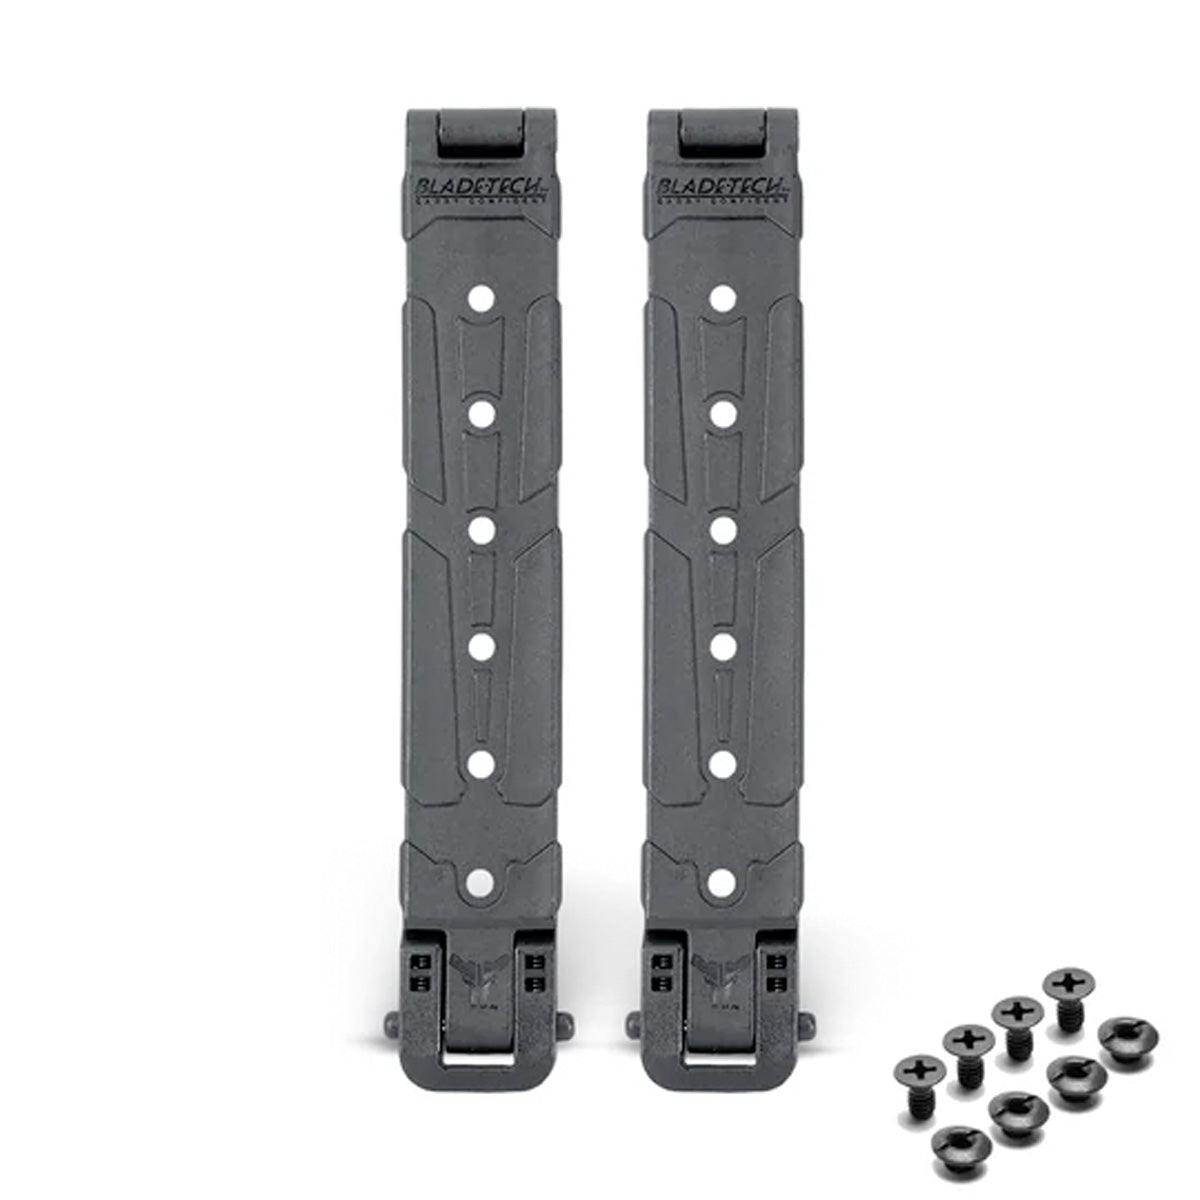 Blade-Tech Molle-Lok Long 5 Inches Accessories Blade-Tech Holsters Pair with Hardware Tactical Gear Supplier Tactical Distributors Australia